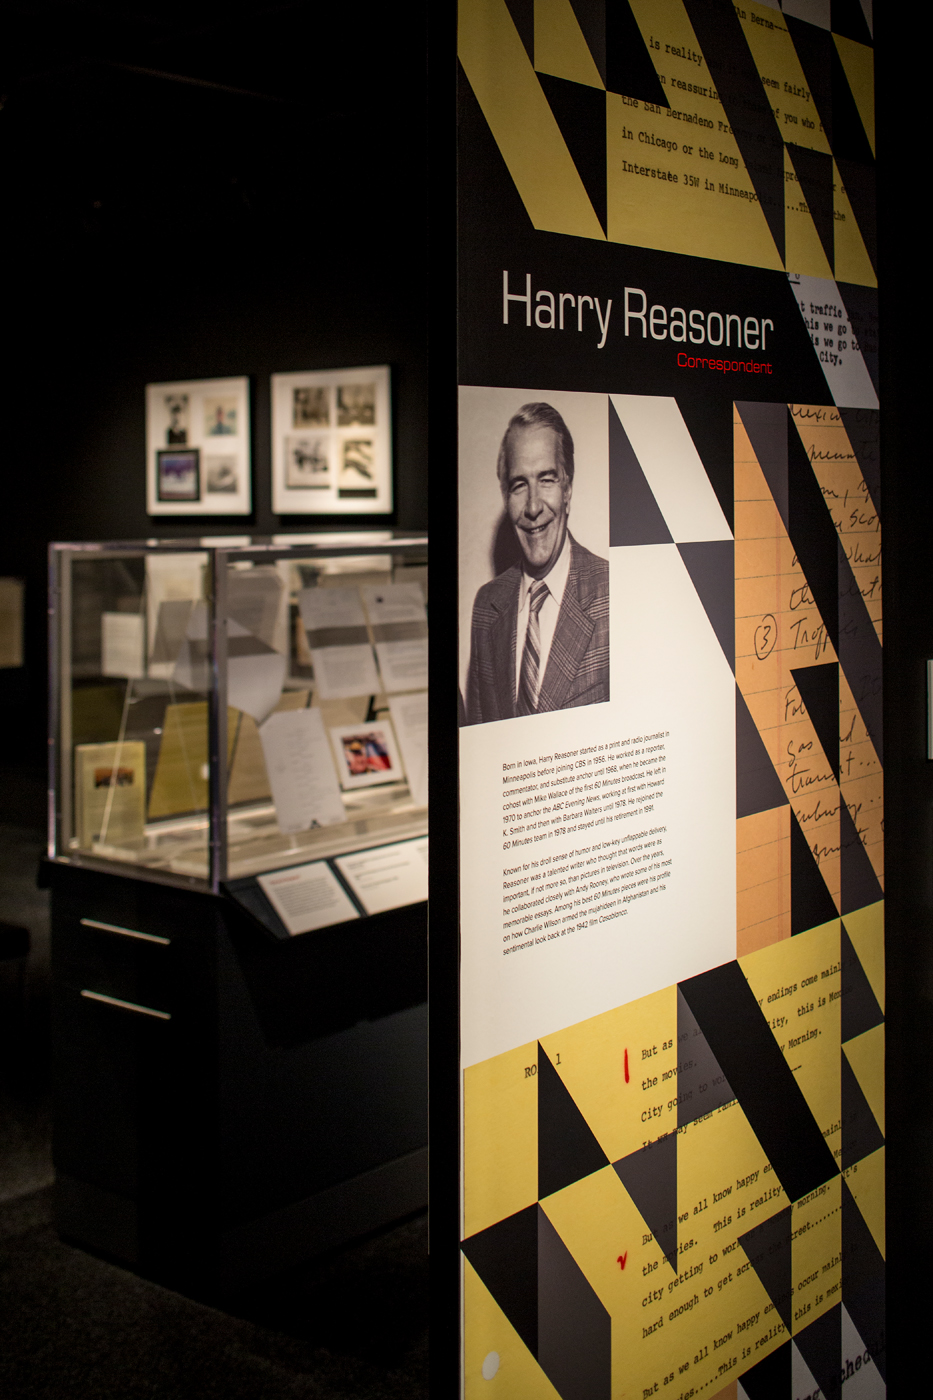 A short biography and picture of harry Reasoner on an exhibit wall.